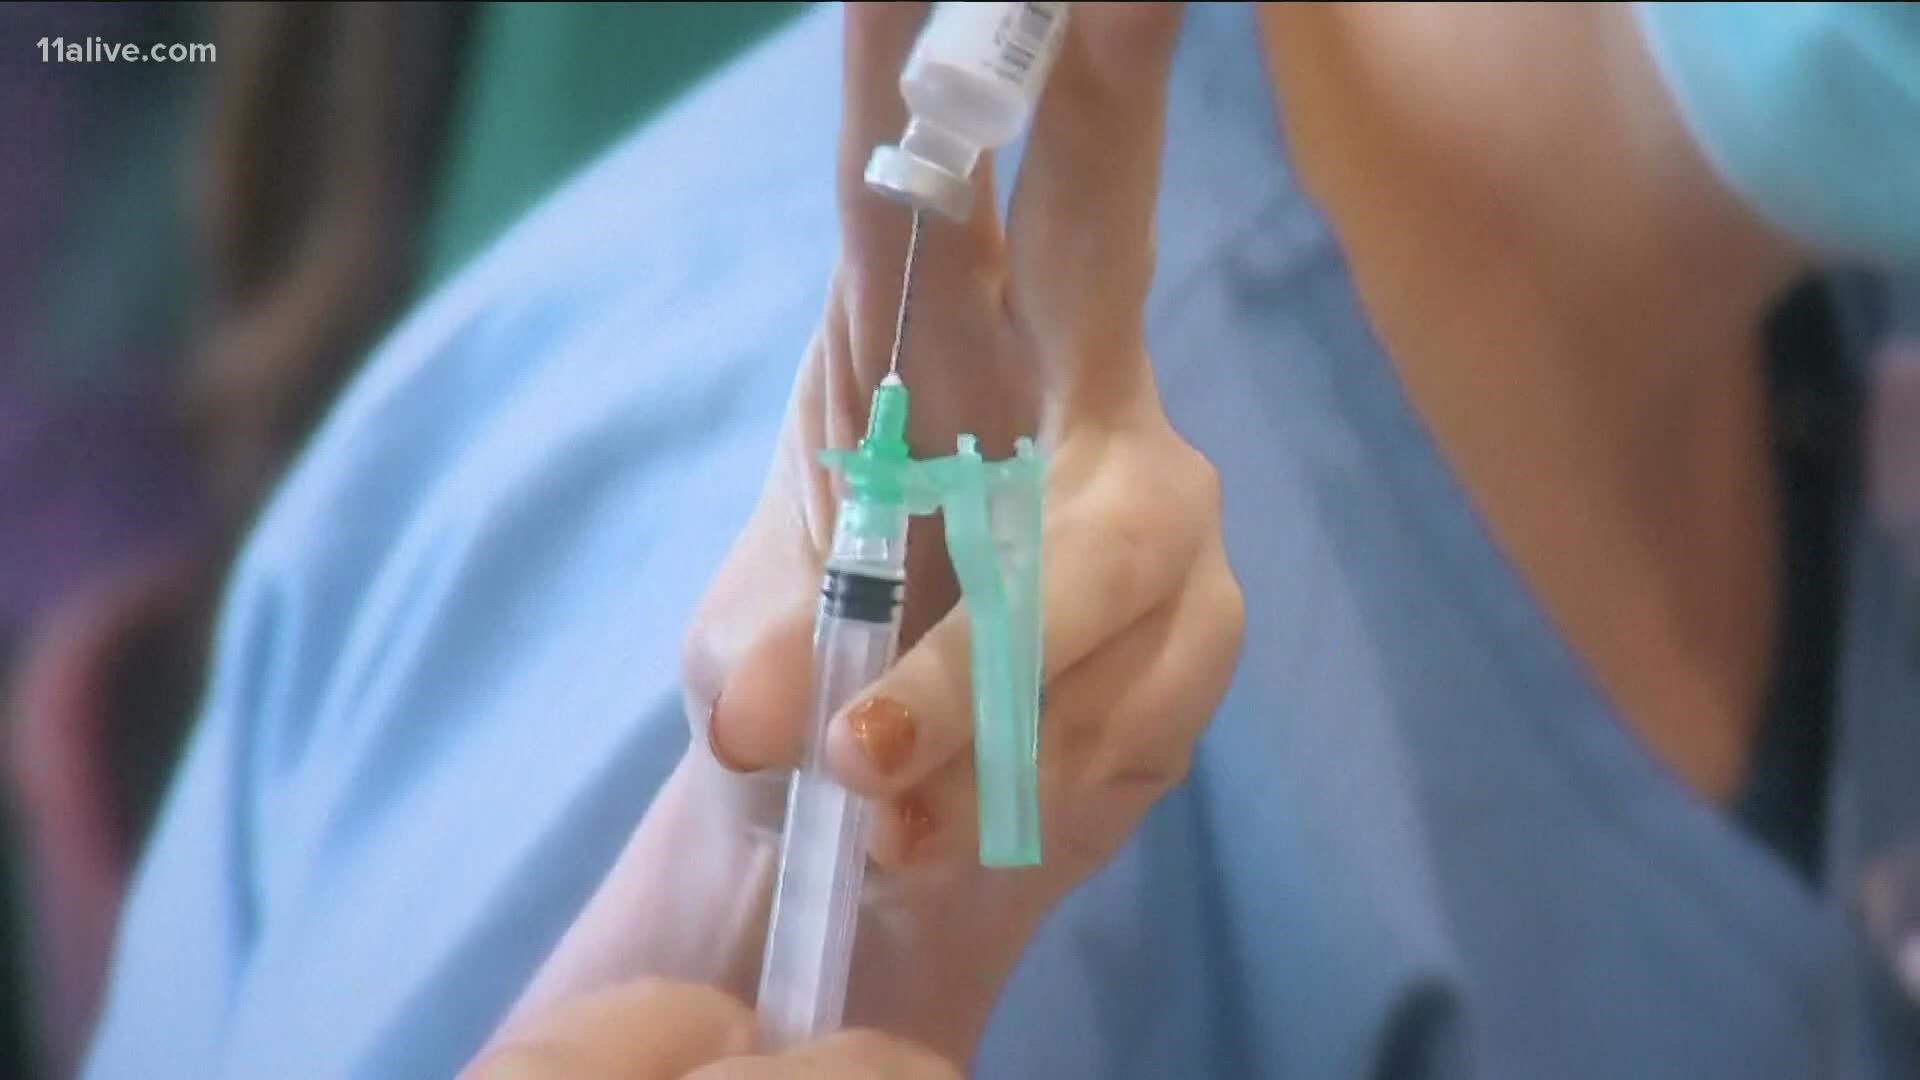 The governor's office is touting a decline in COVID-19 numbers and a rise in vaccinations in Georgia.